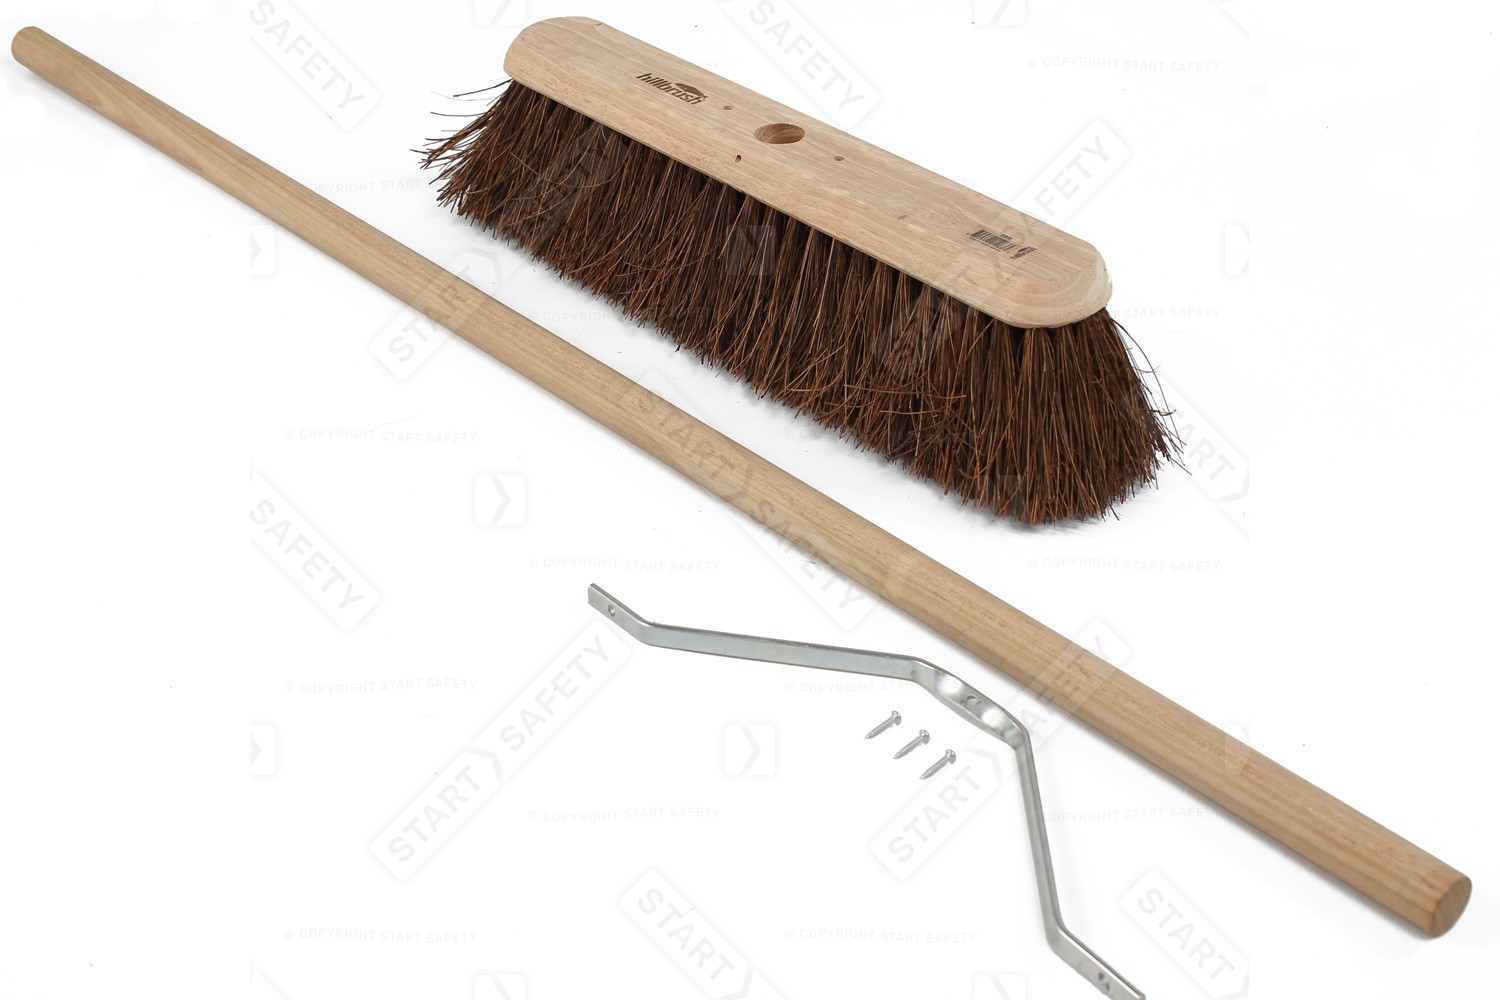 Hillbrush H5/3 Broom With Handle & Stay!